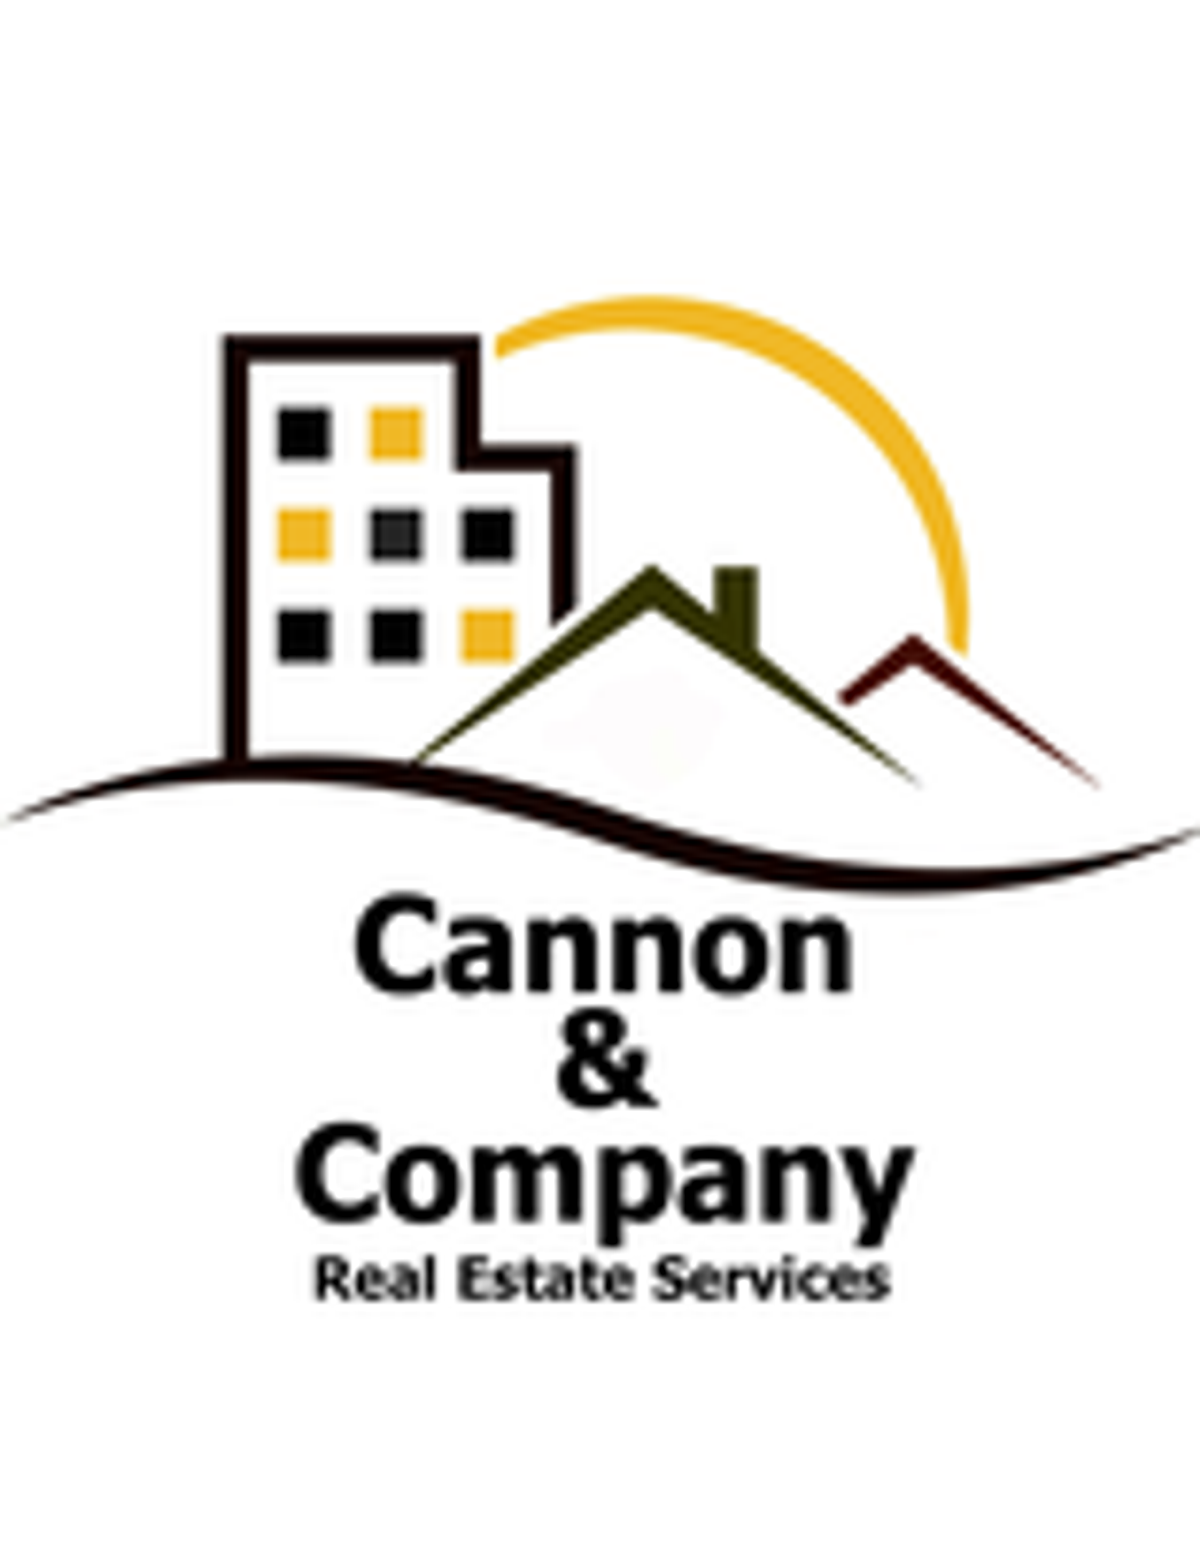 Photo for Deborah Clark, Listing Agent at Cannon & Company